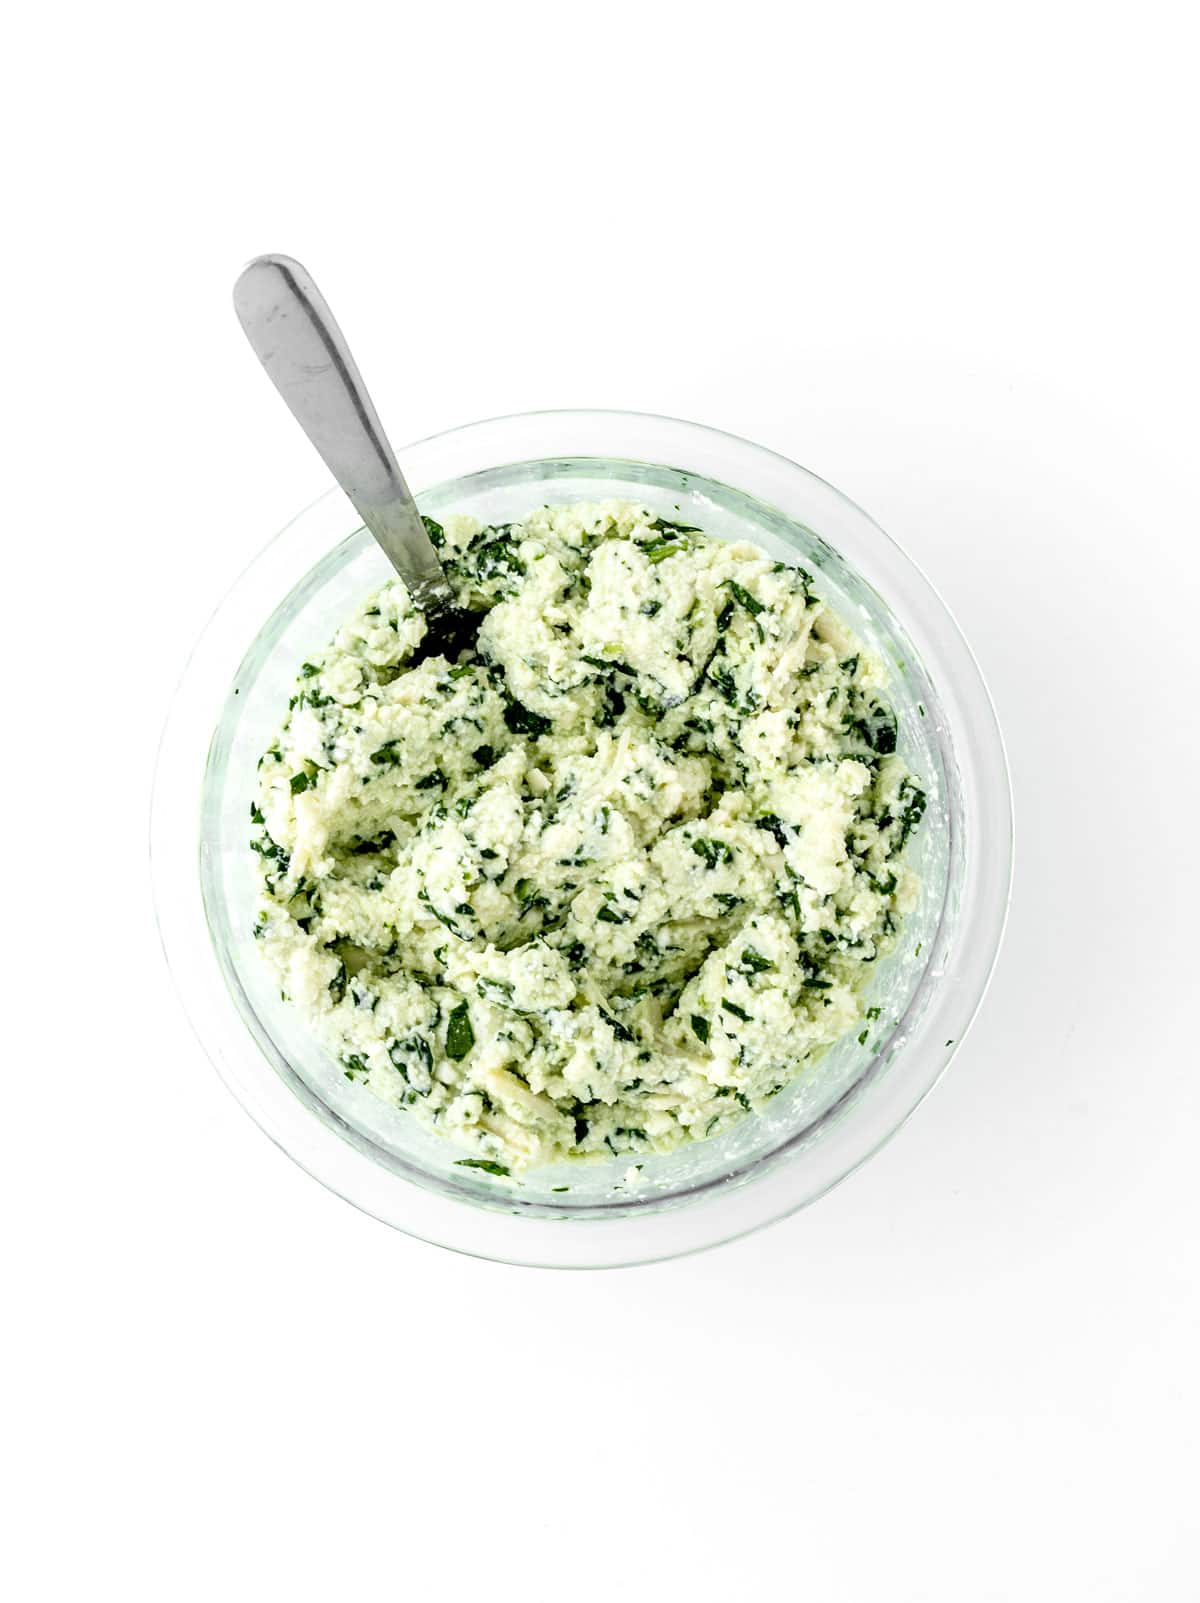 The ricotta mixture in a clear glass bowl with a spoon.